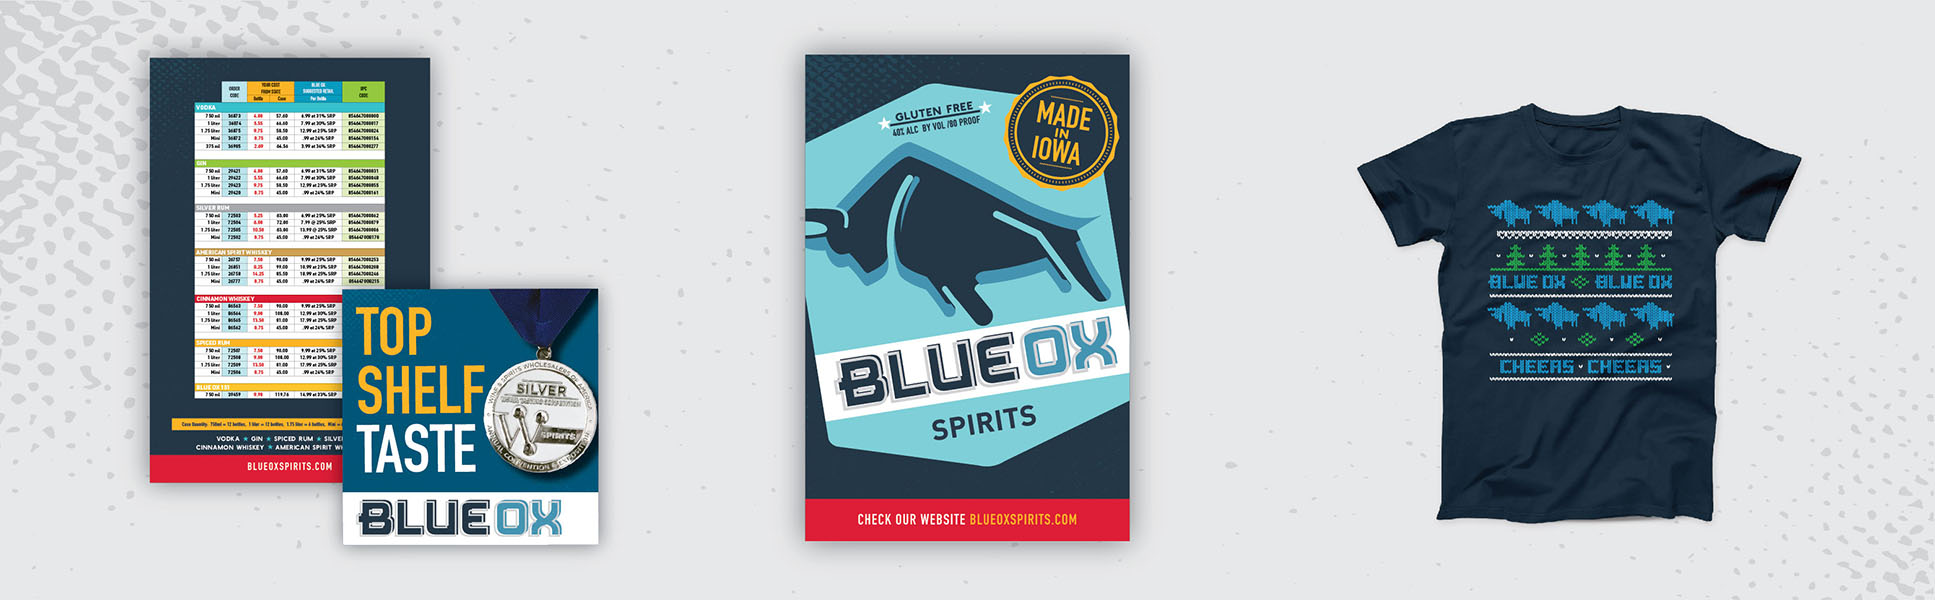 Blue Ox Spirits sales sheet, poster and holiday T-shirt designed by Project7 Design